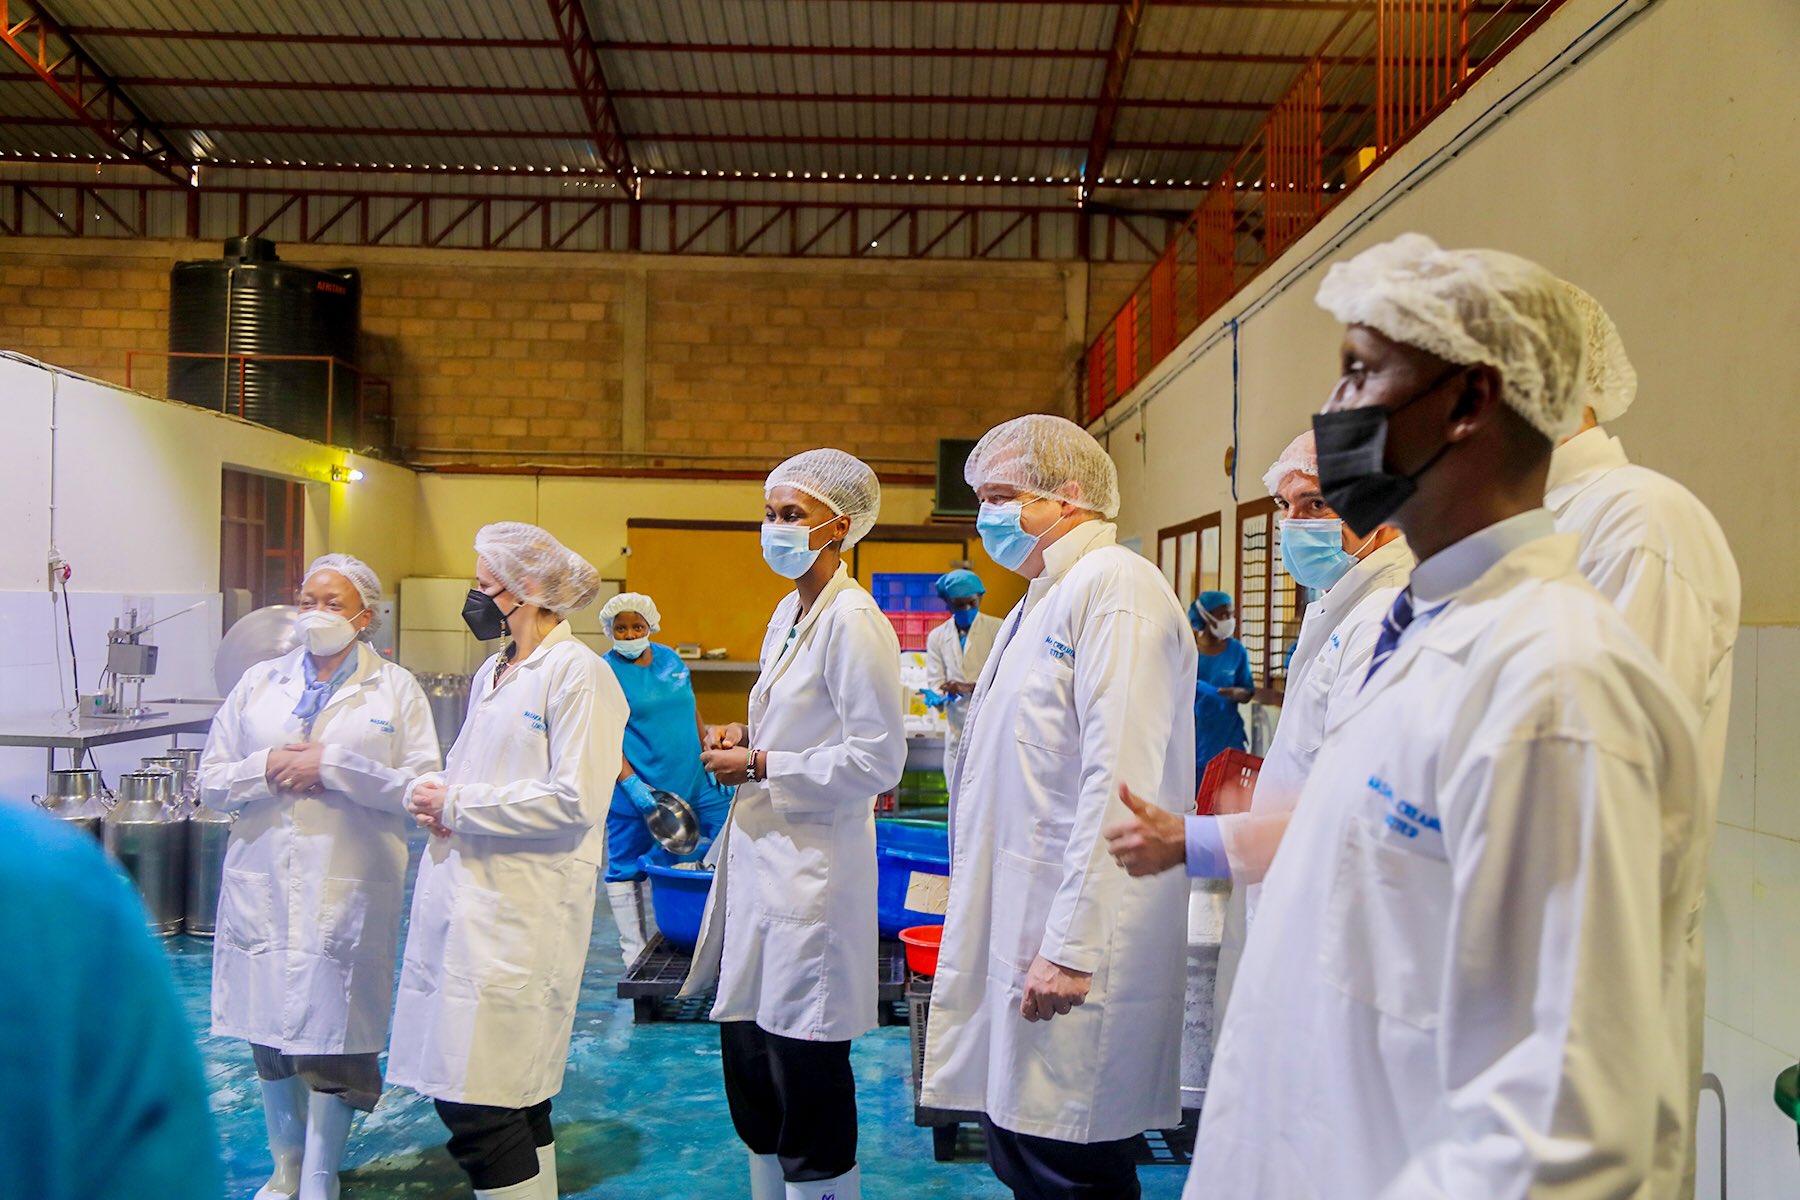 Dominik Ziller, the Vice President of the International Fund for Agricultural Development (IFAD) with the delagation  tour at the Masaka Creamery Ltd , a Kigali-based dairy processing factory on May 10. 